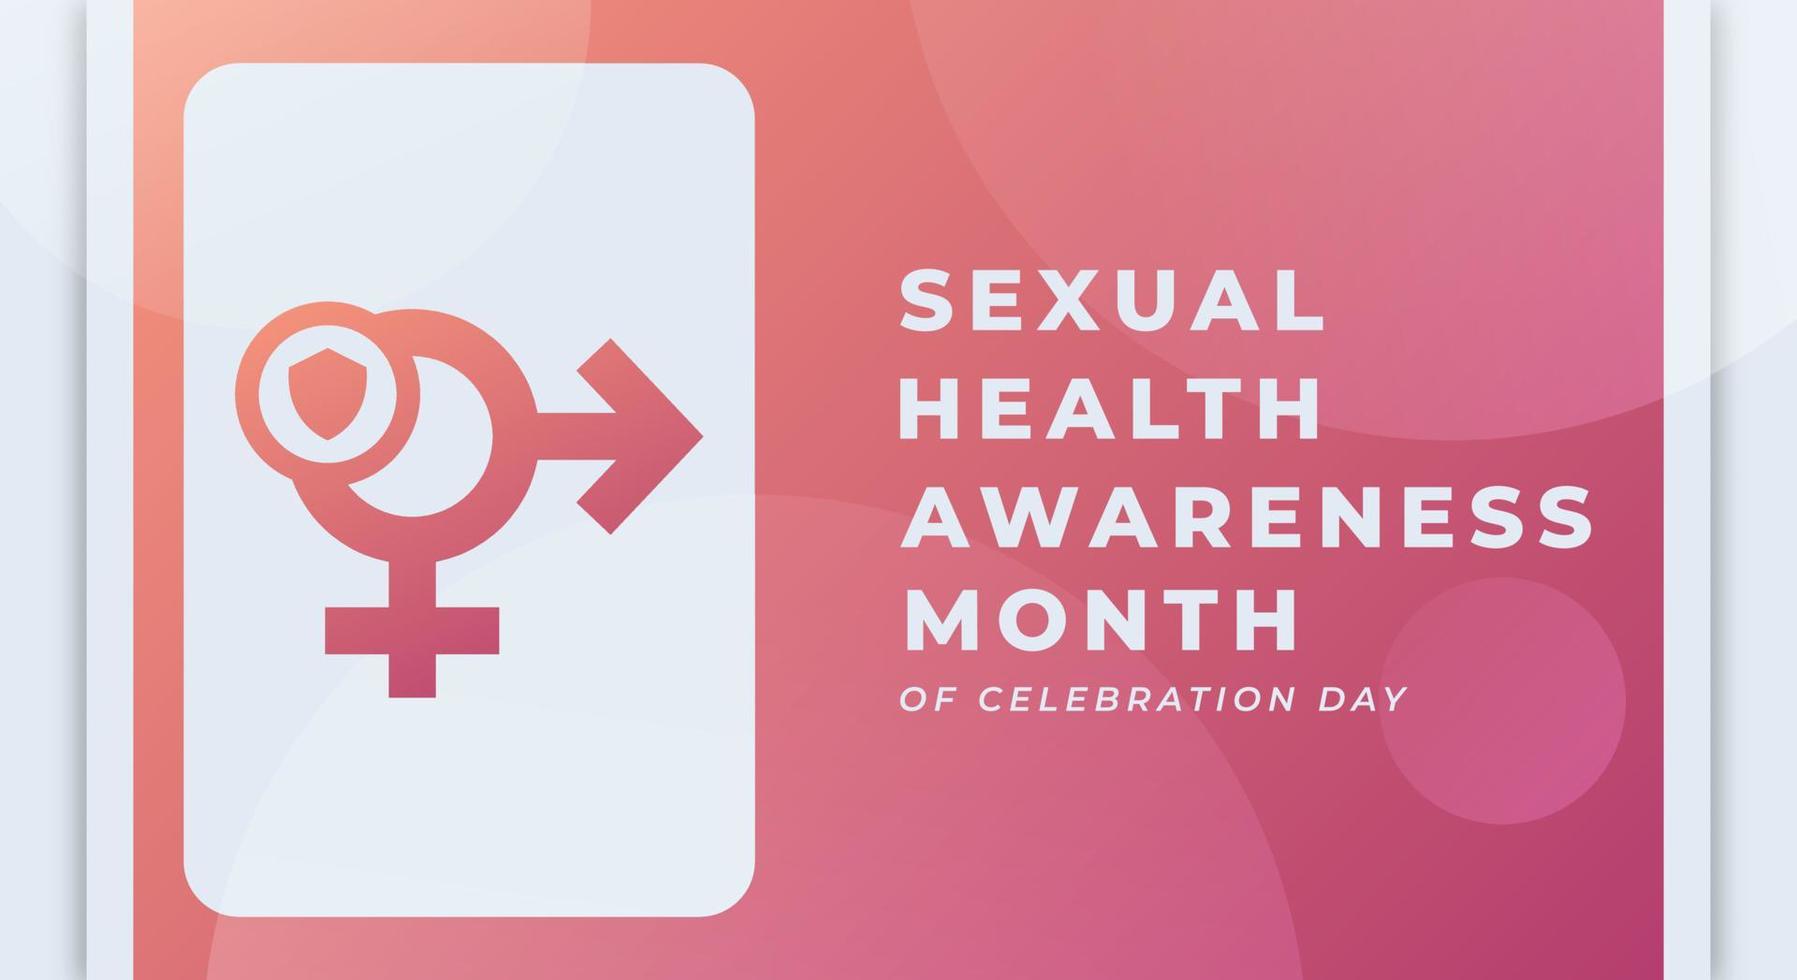 Happy Sexual Health Awareness Month Celebration Vector Design Illustration for Background, Poster, Banner, Advertising, Greeting Card